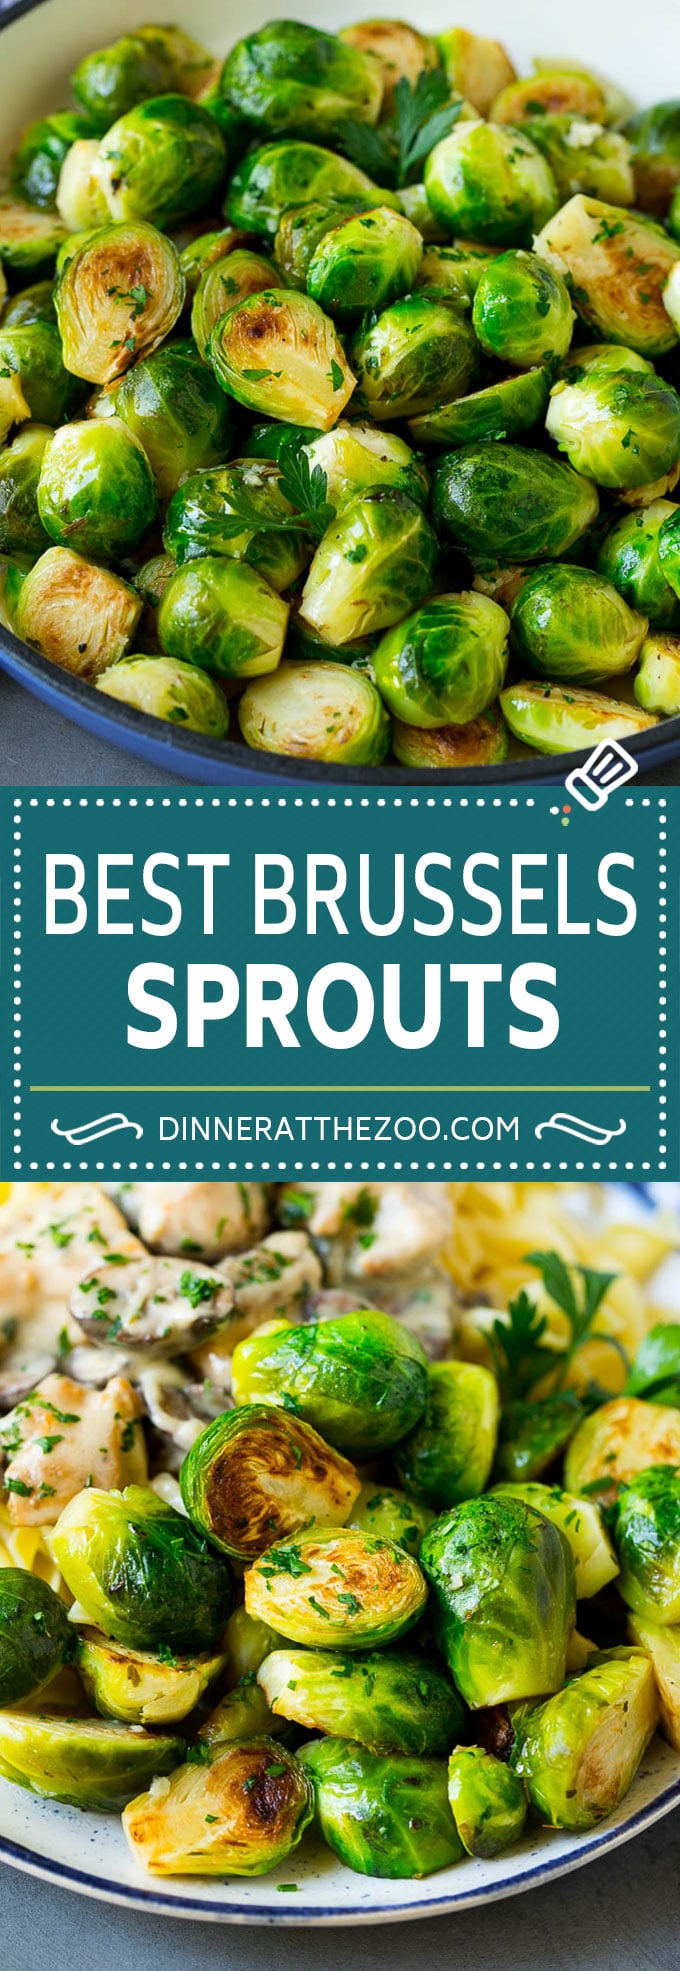 Sauteed Brussels Sprouts Recipe | Brussels Sprouts Side Dish #brusselssprouts #sprouts #veggies #sidedish #garlic #vegetarian #dinner #dinneratthezoo